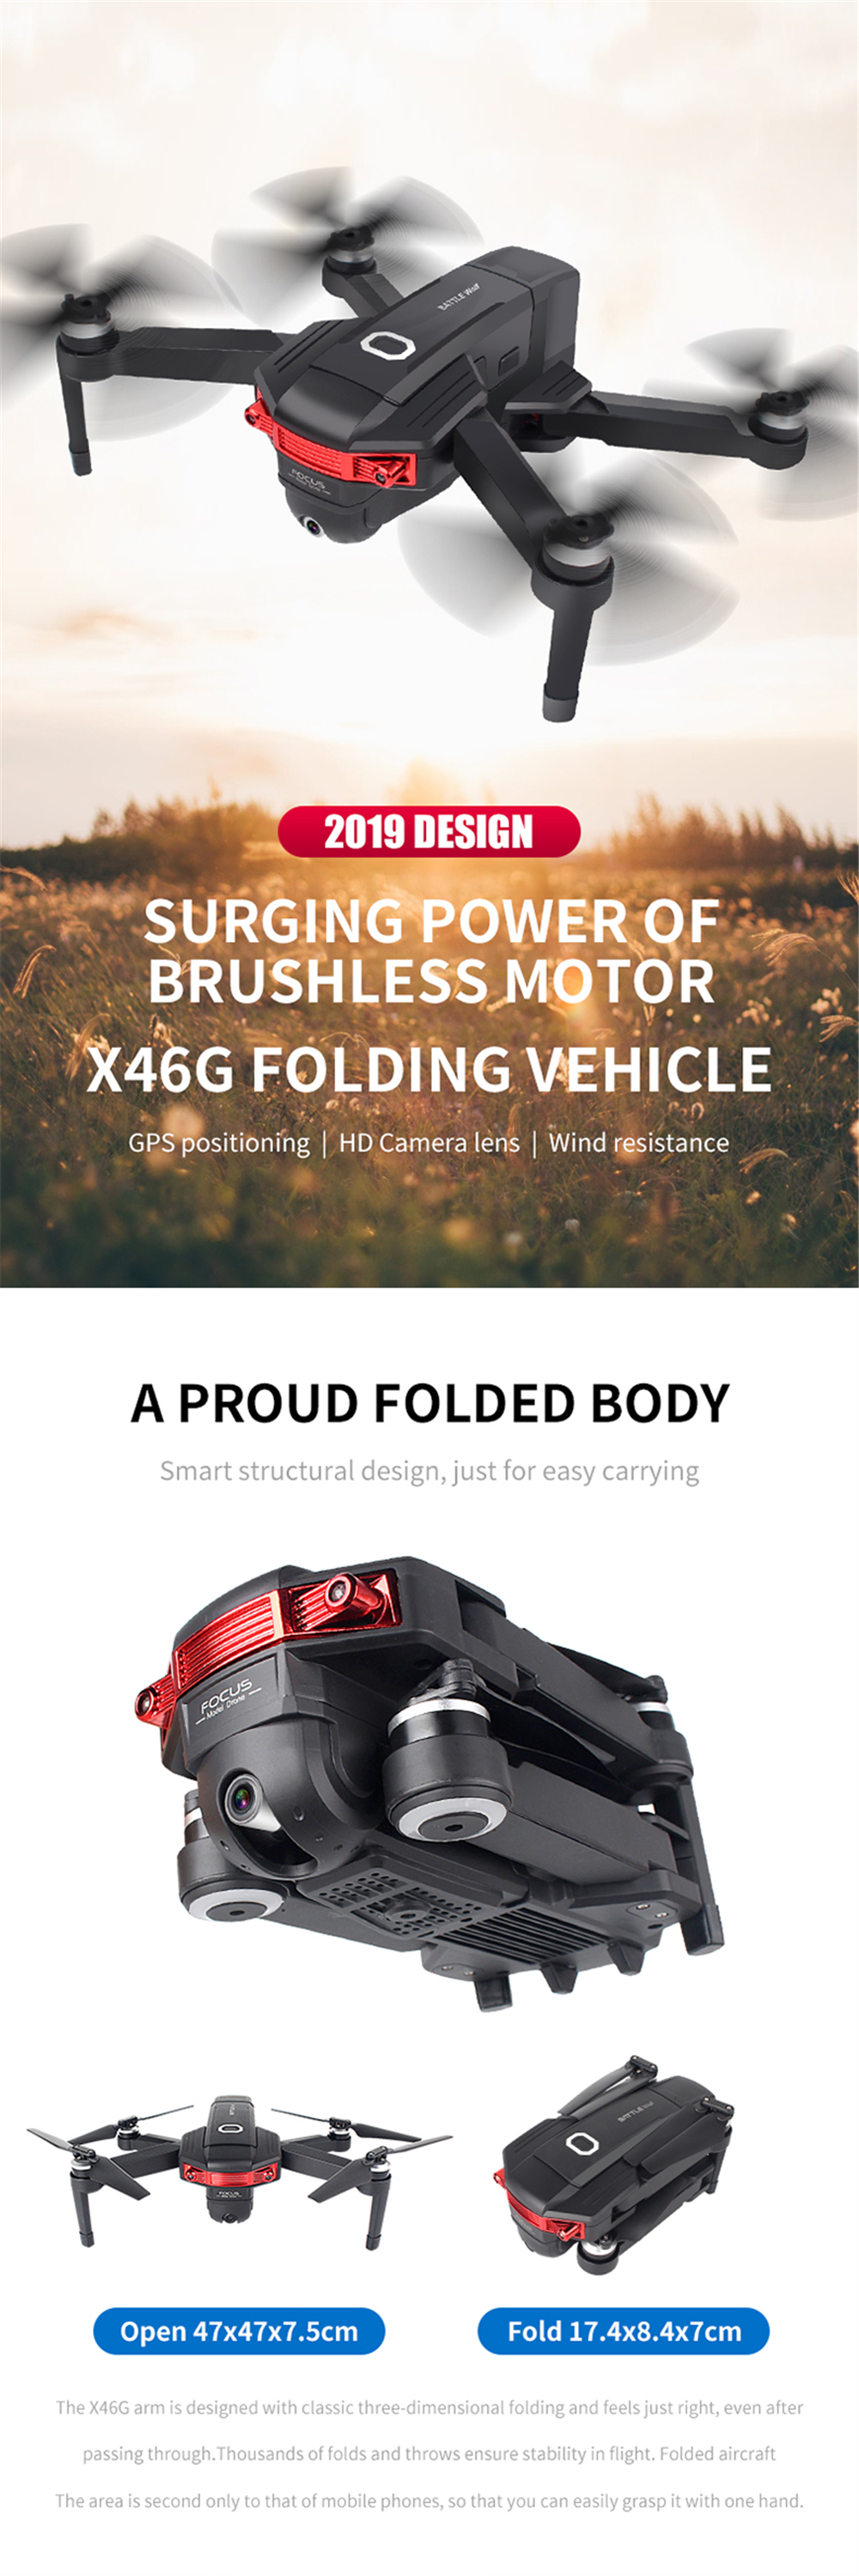 X46G-4K-5G-WIFI-FPV-GPS-With-4K-Wide-Angle-Dual-Camera-Brushless-Foldable-RC-Drone-Quadcopter-RTF-1543252